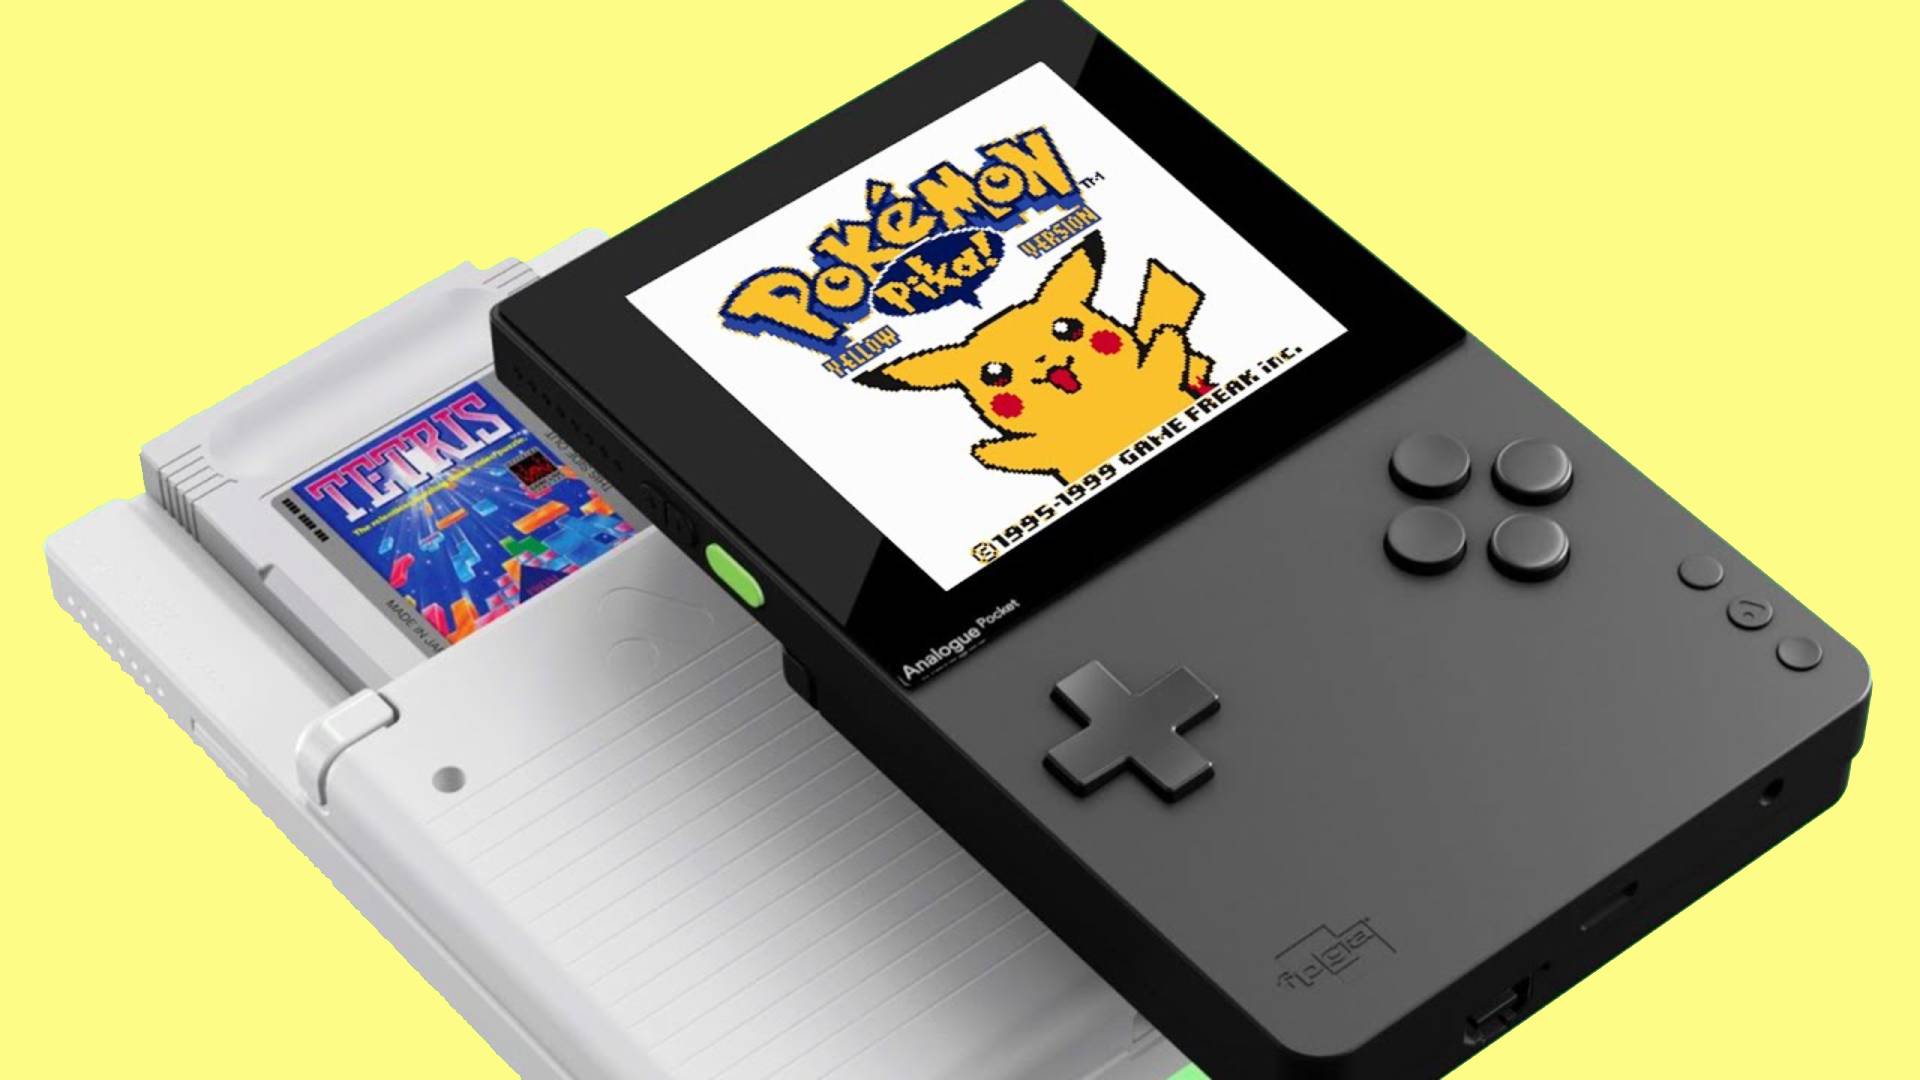 Level up your Game Boy collection, Analogue Pocket pre-orders today | Pocket Tactics